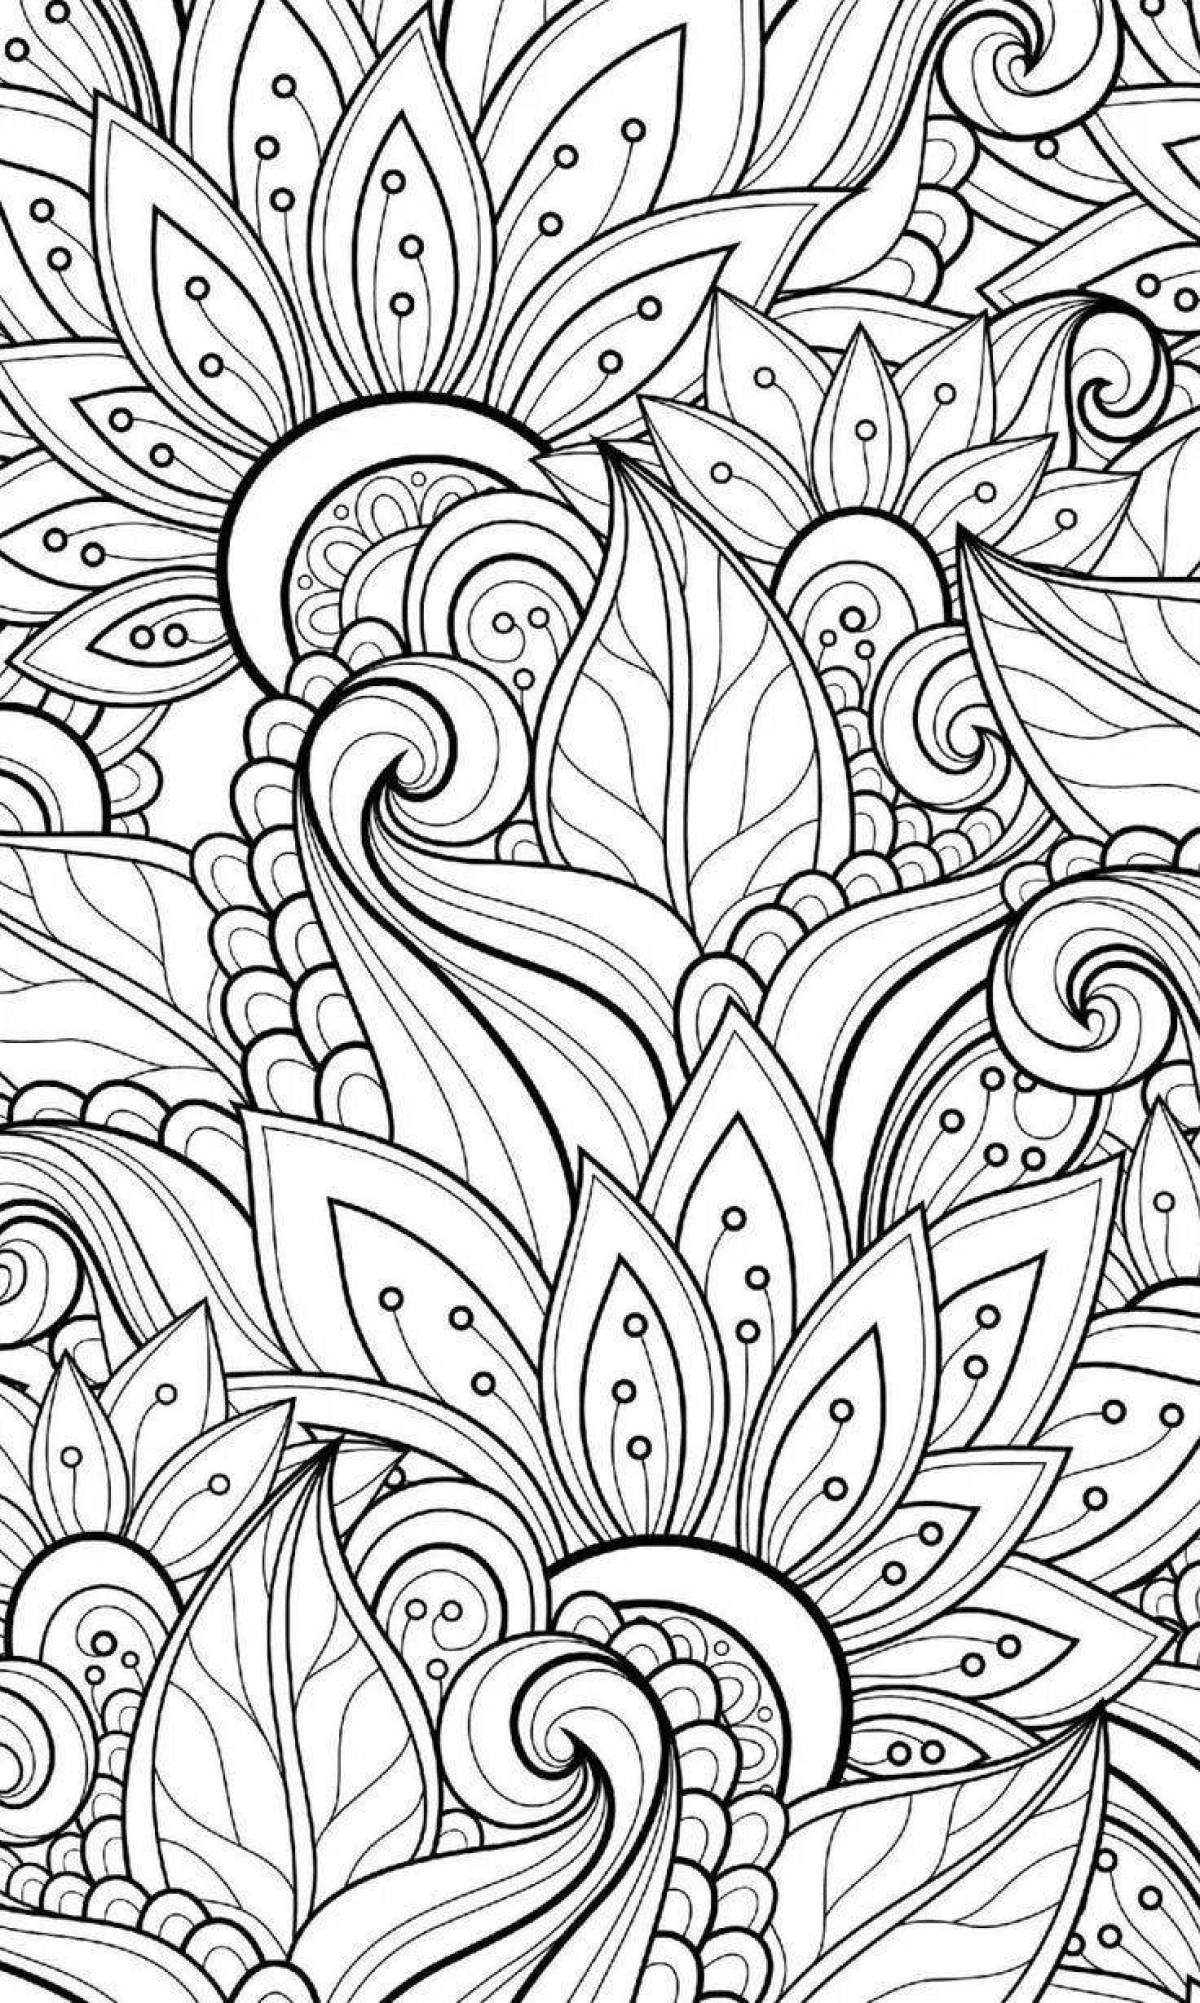 Abstract coloring book for adults, large